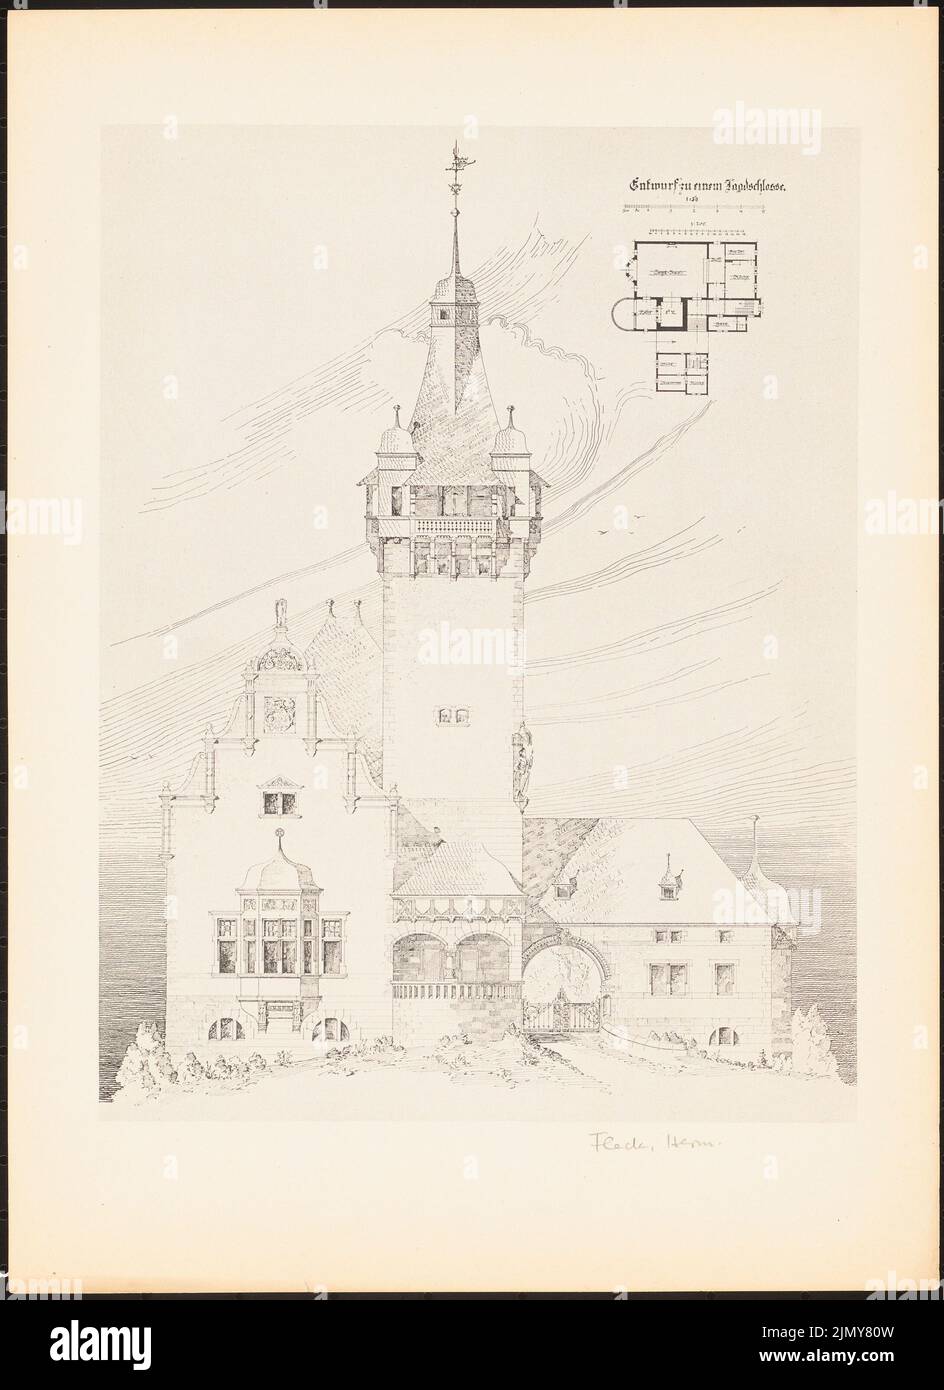 Fleck Hermann, hunting lodge. (From: Prints of seminar works by the Royal Technical University of Berlin, Vol. I) (1890-1902): floor plan, view. Print on paper, 33.3 x 24.2 cm (including scan edges) Stock Photo